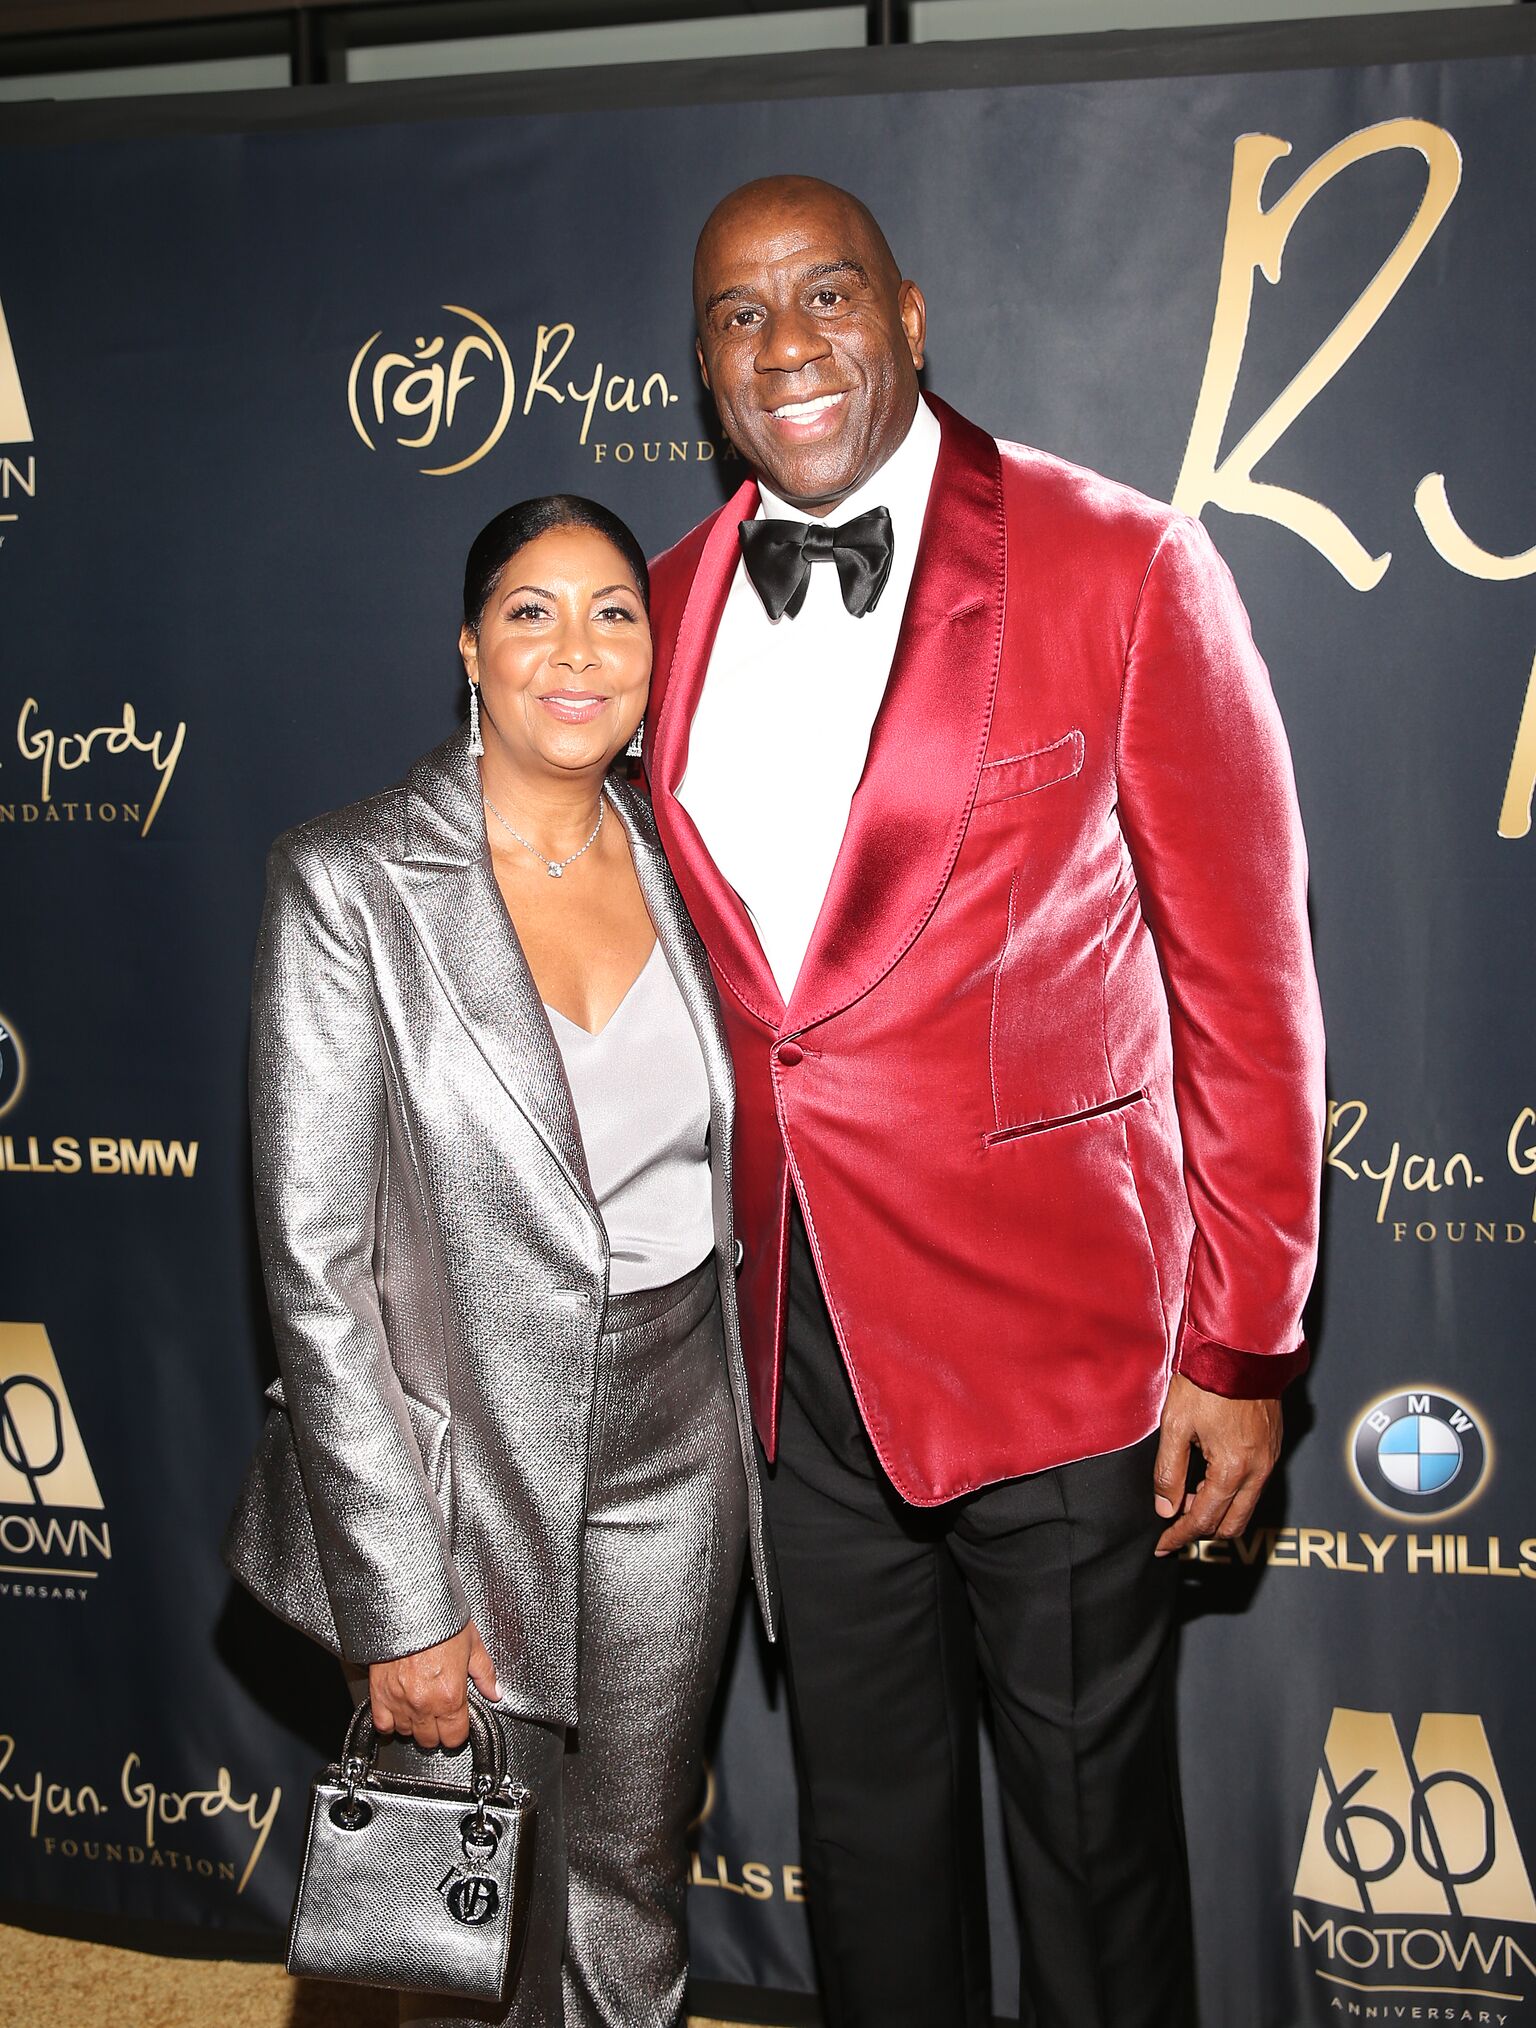 Cookie Johnson and Earvin "Magic" Johnson attend the Ryan Gordy Foundation "60 Years of Motown" Celebration at the Waldorf Astoria Beverly Hills on November 11, 2019 in Beverly Hills, California. | Photo: Getty Images